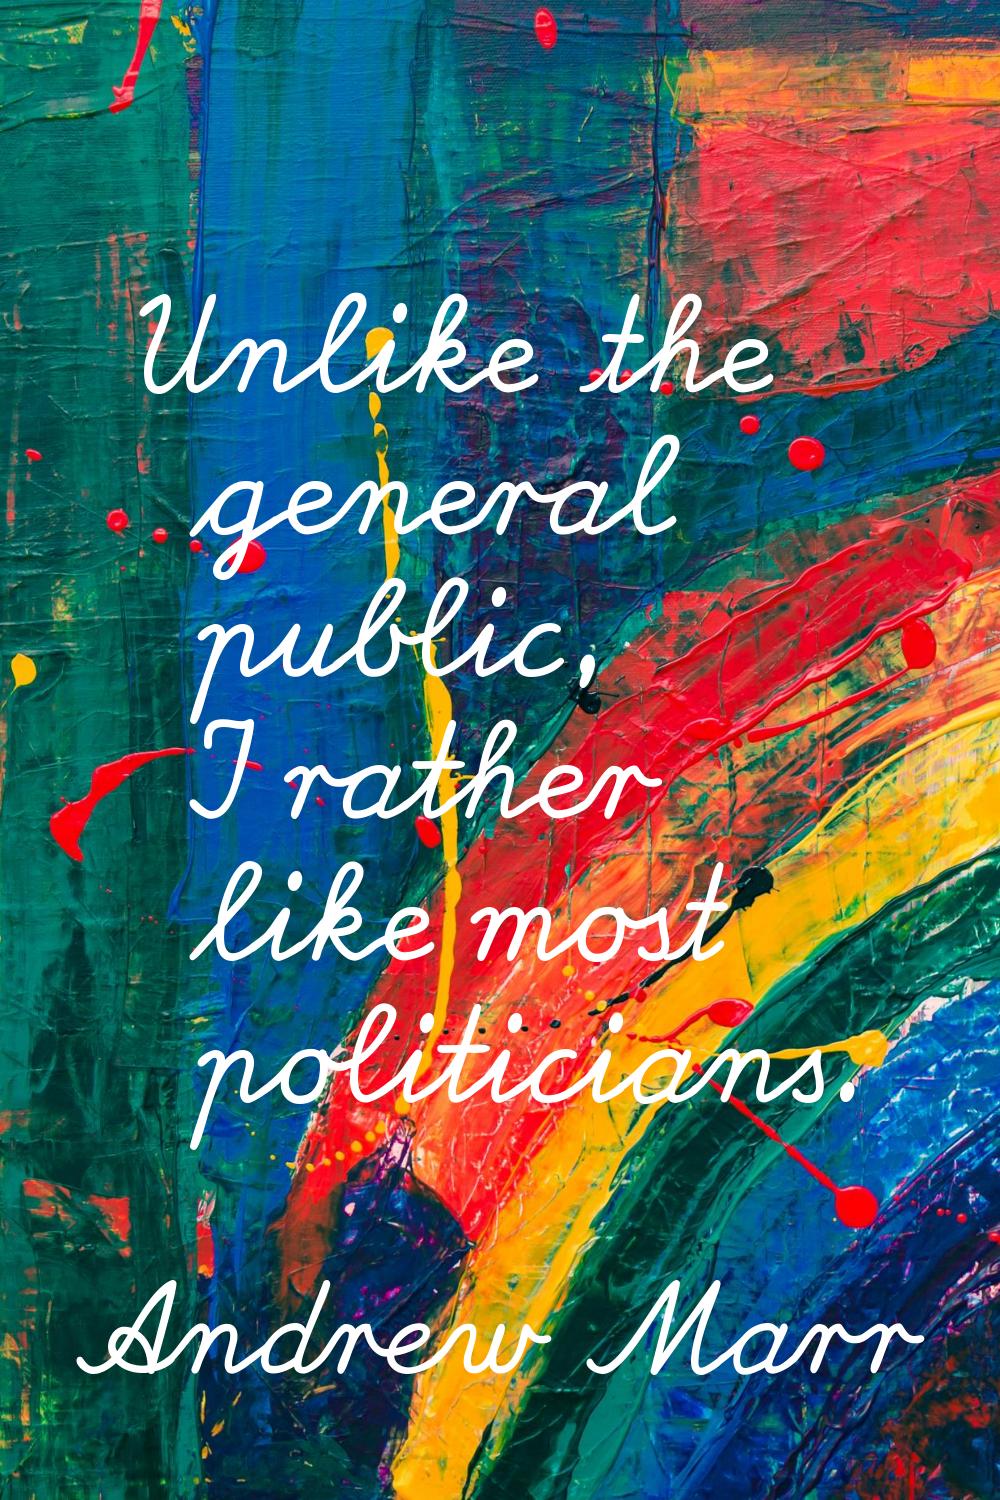 Unlike the general public, I rather like most politicians.